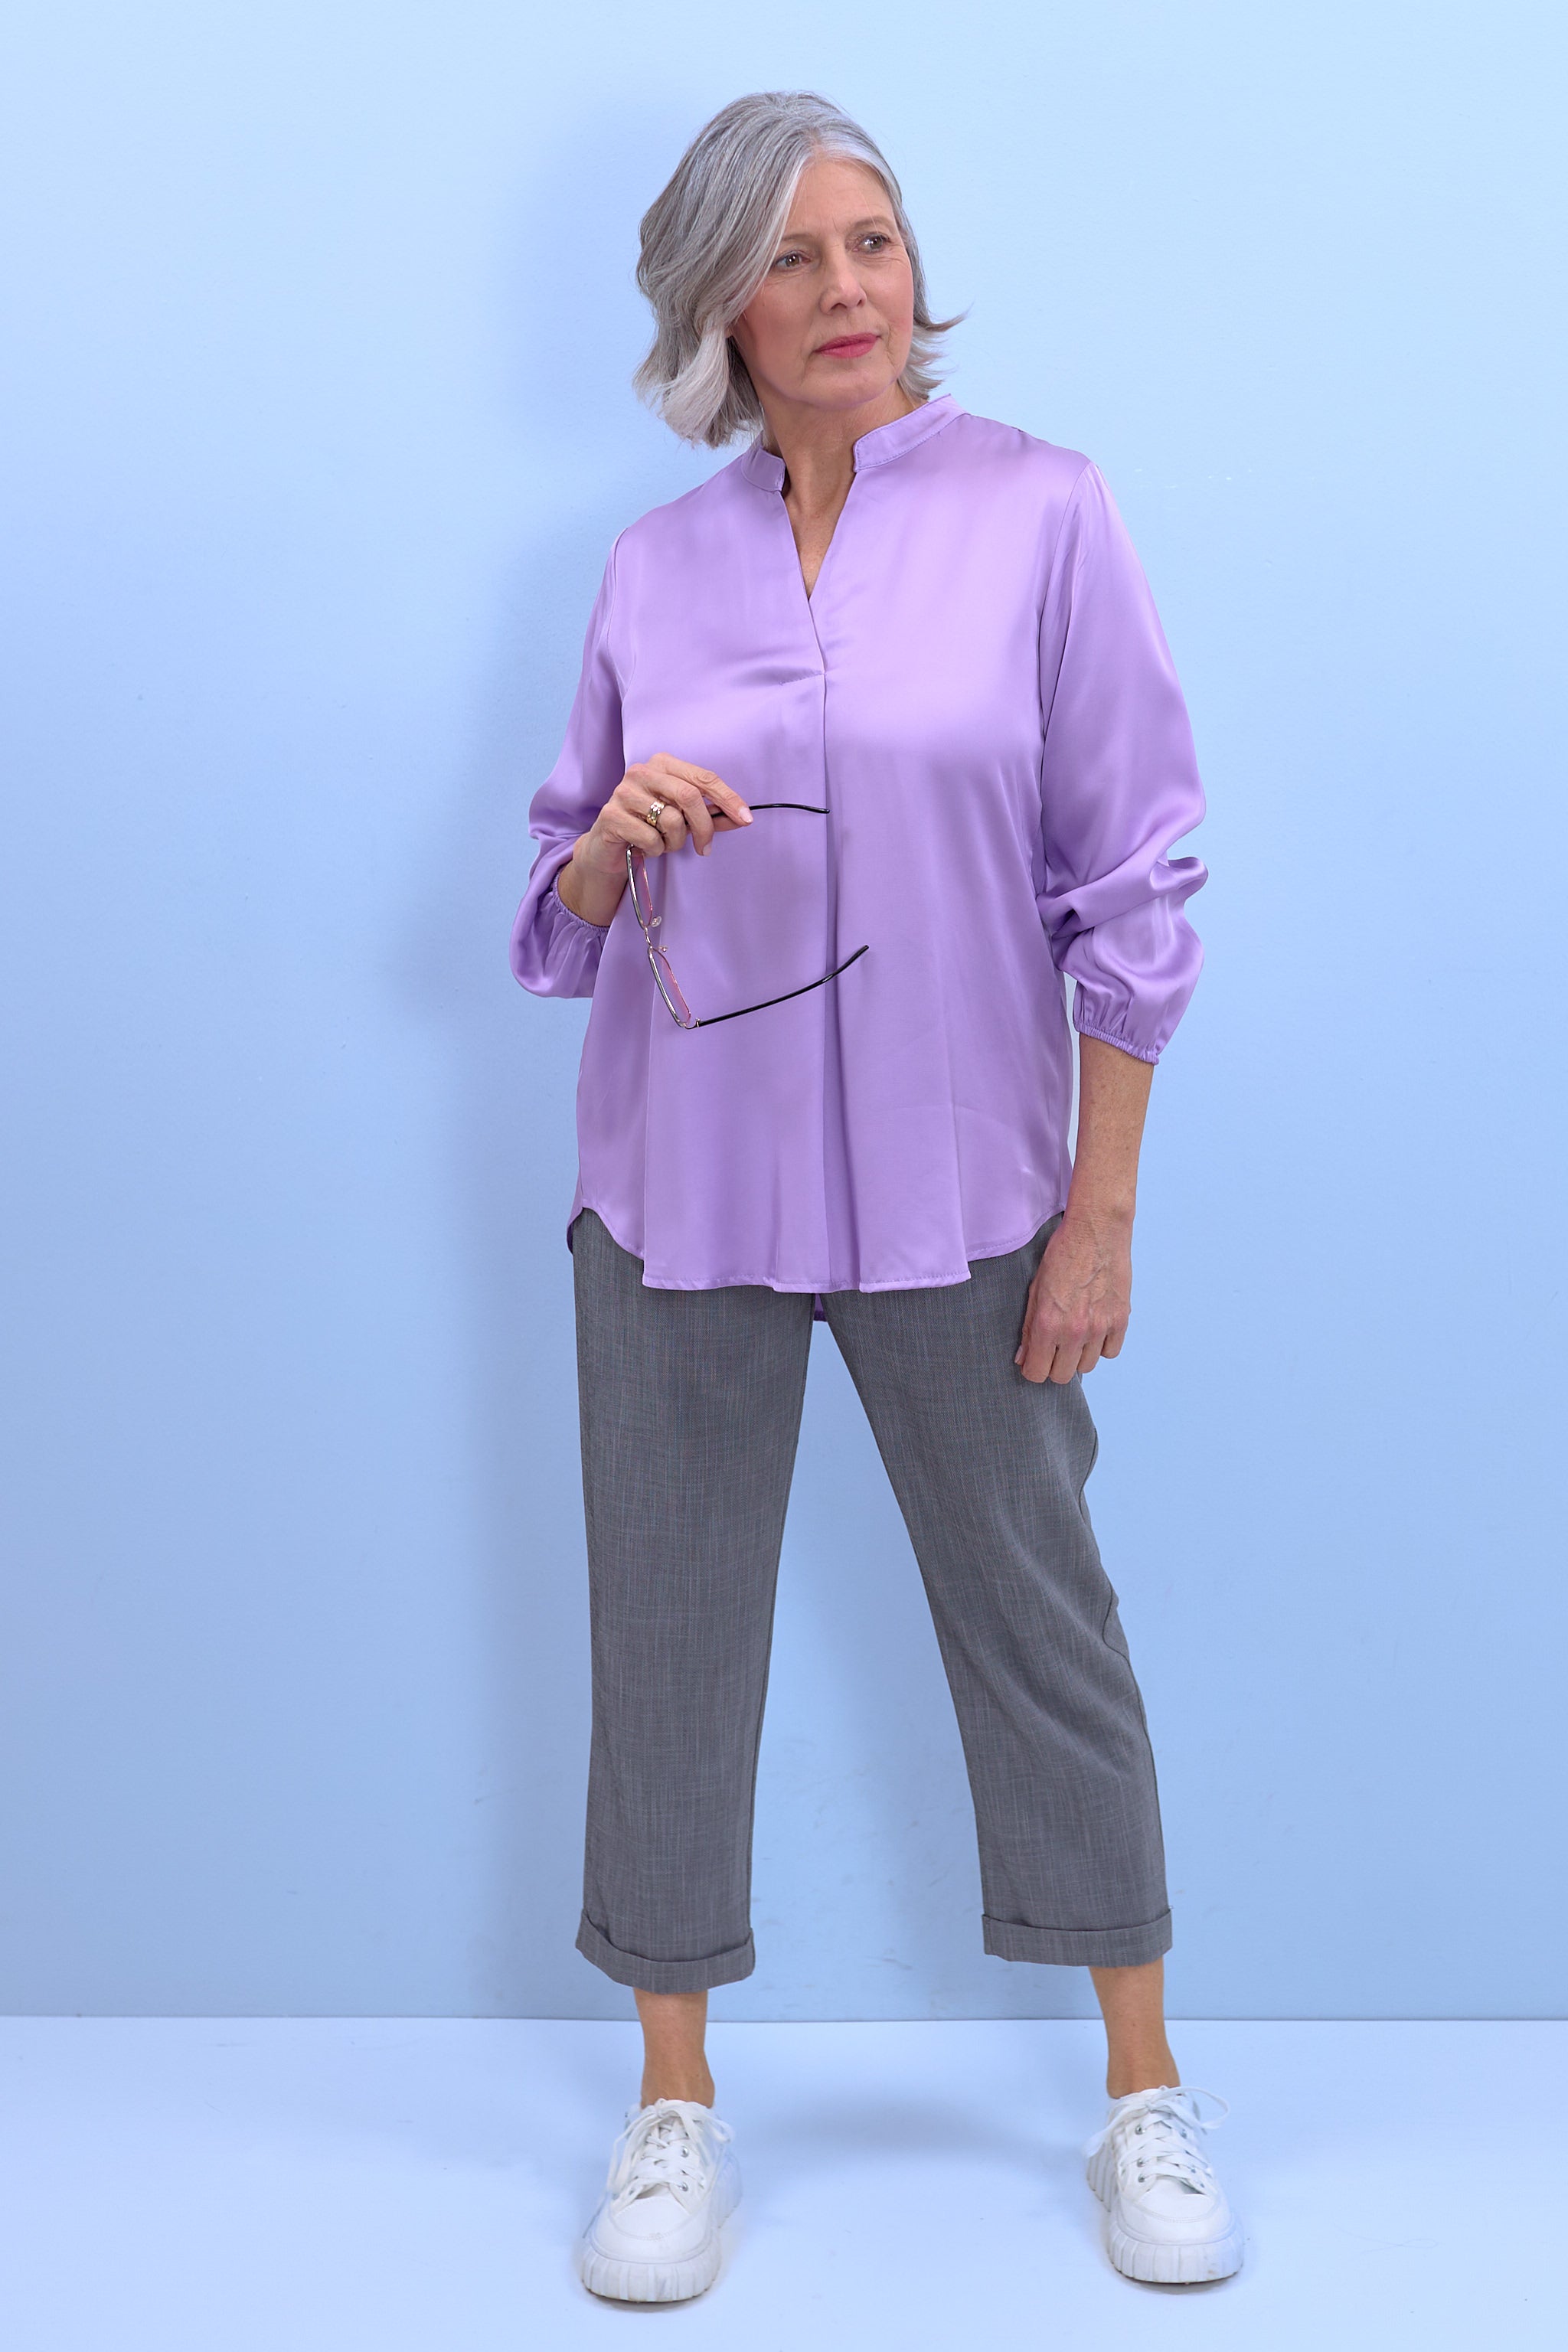 Blouse made of shiny fabric with a V-neck, purple